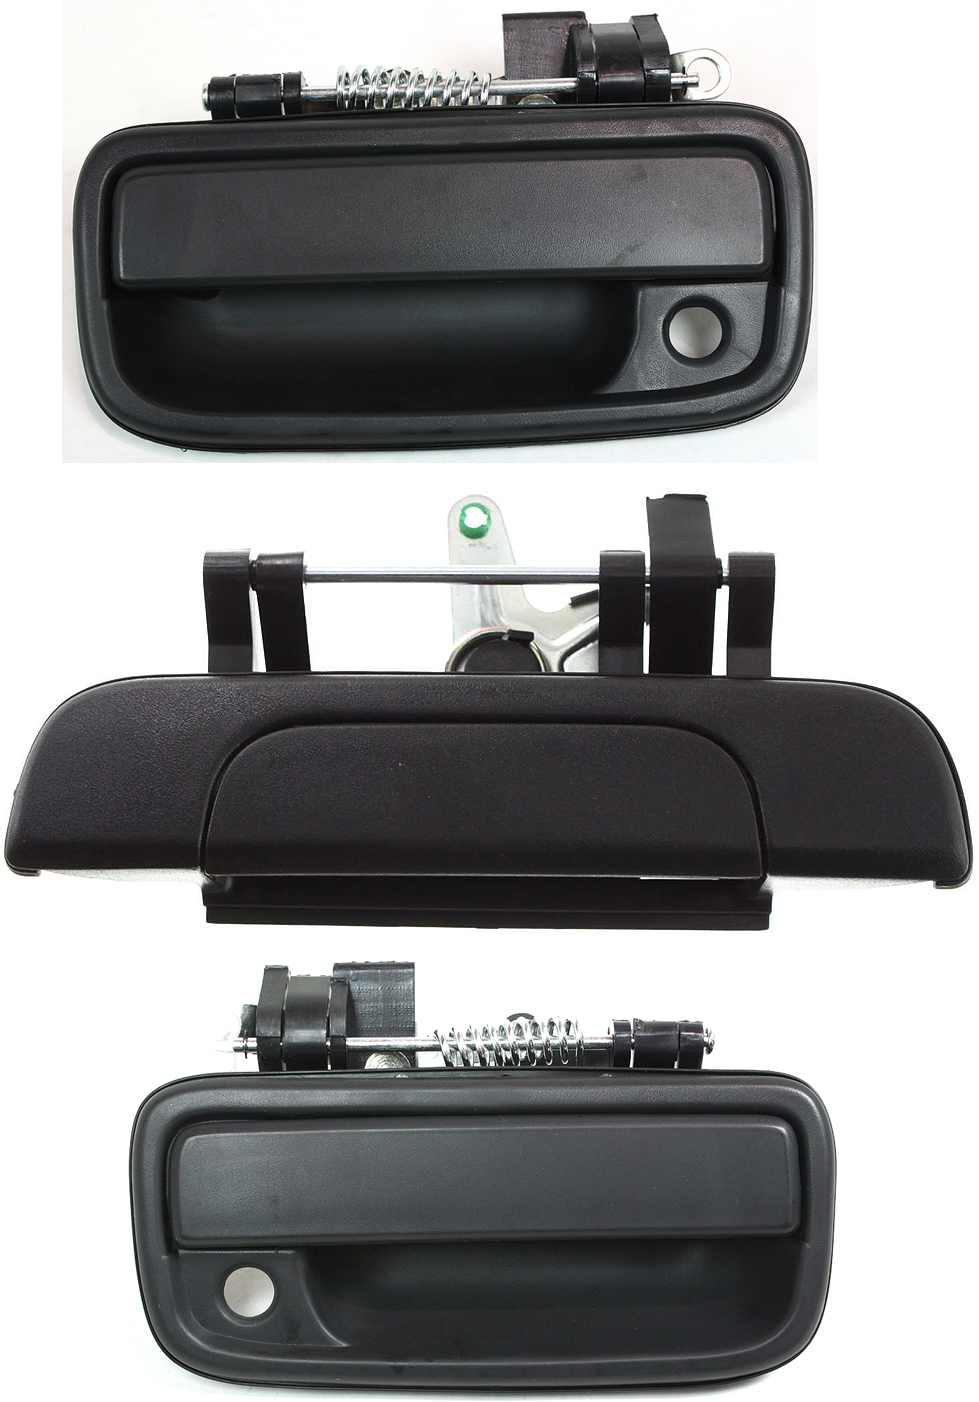 New TO1310117 TO1311117 Exterior Door Handle Set for Toyota Tacoma 1995-2000 